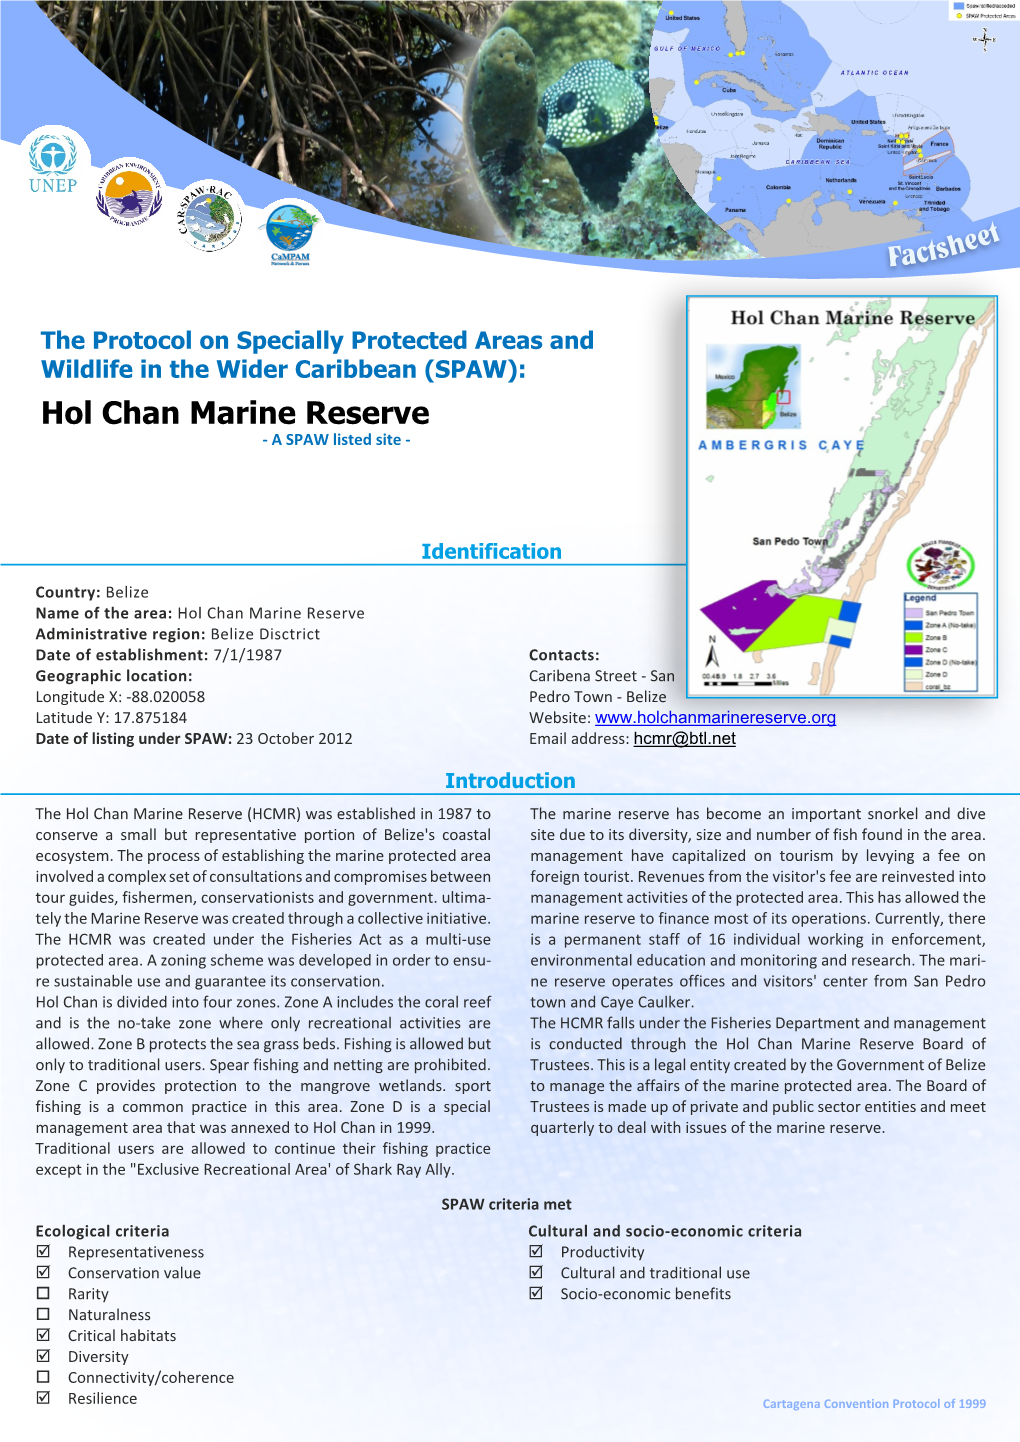 Hol Chan Marine Reserve - a SPAW Listed Site